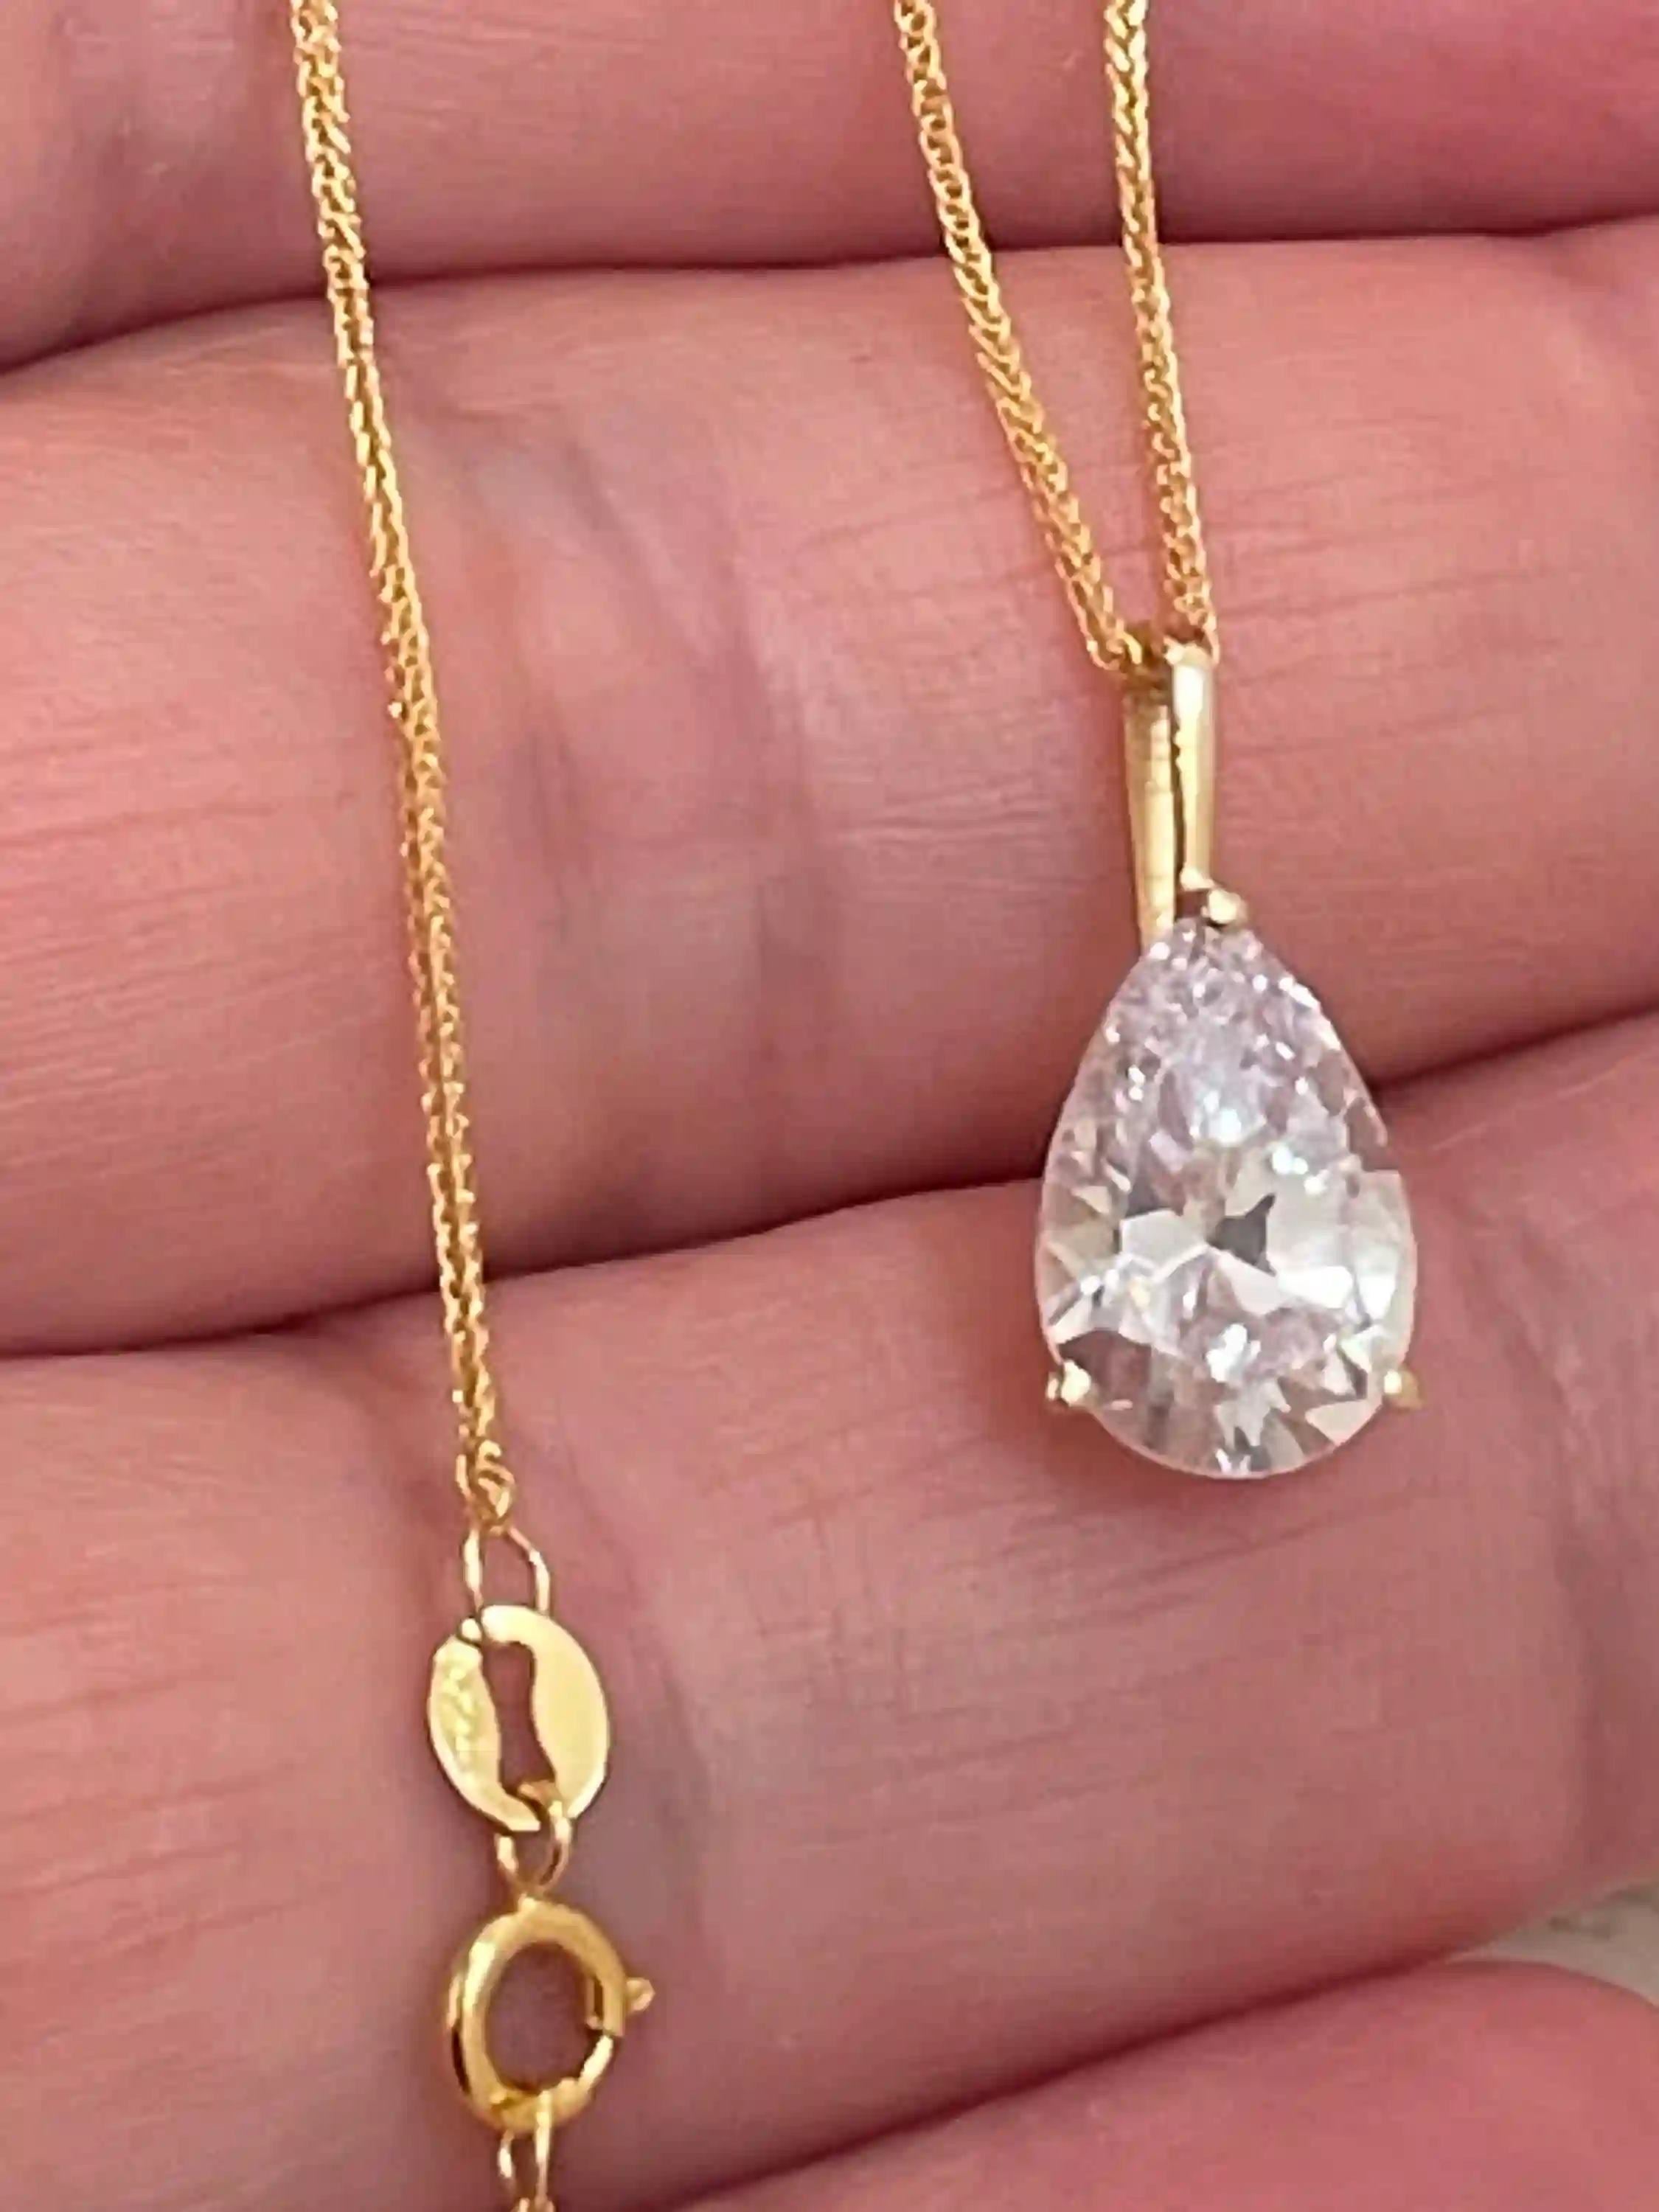 1.65ct SOLID 18k Gold Tear Drop Diamond Solitaire Pendant Pear Shaped Necklace Delicate Bridal Necklace Yellow Gold Pendant Handmade Jewelry 